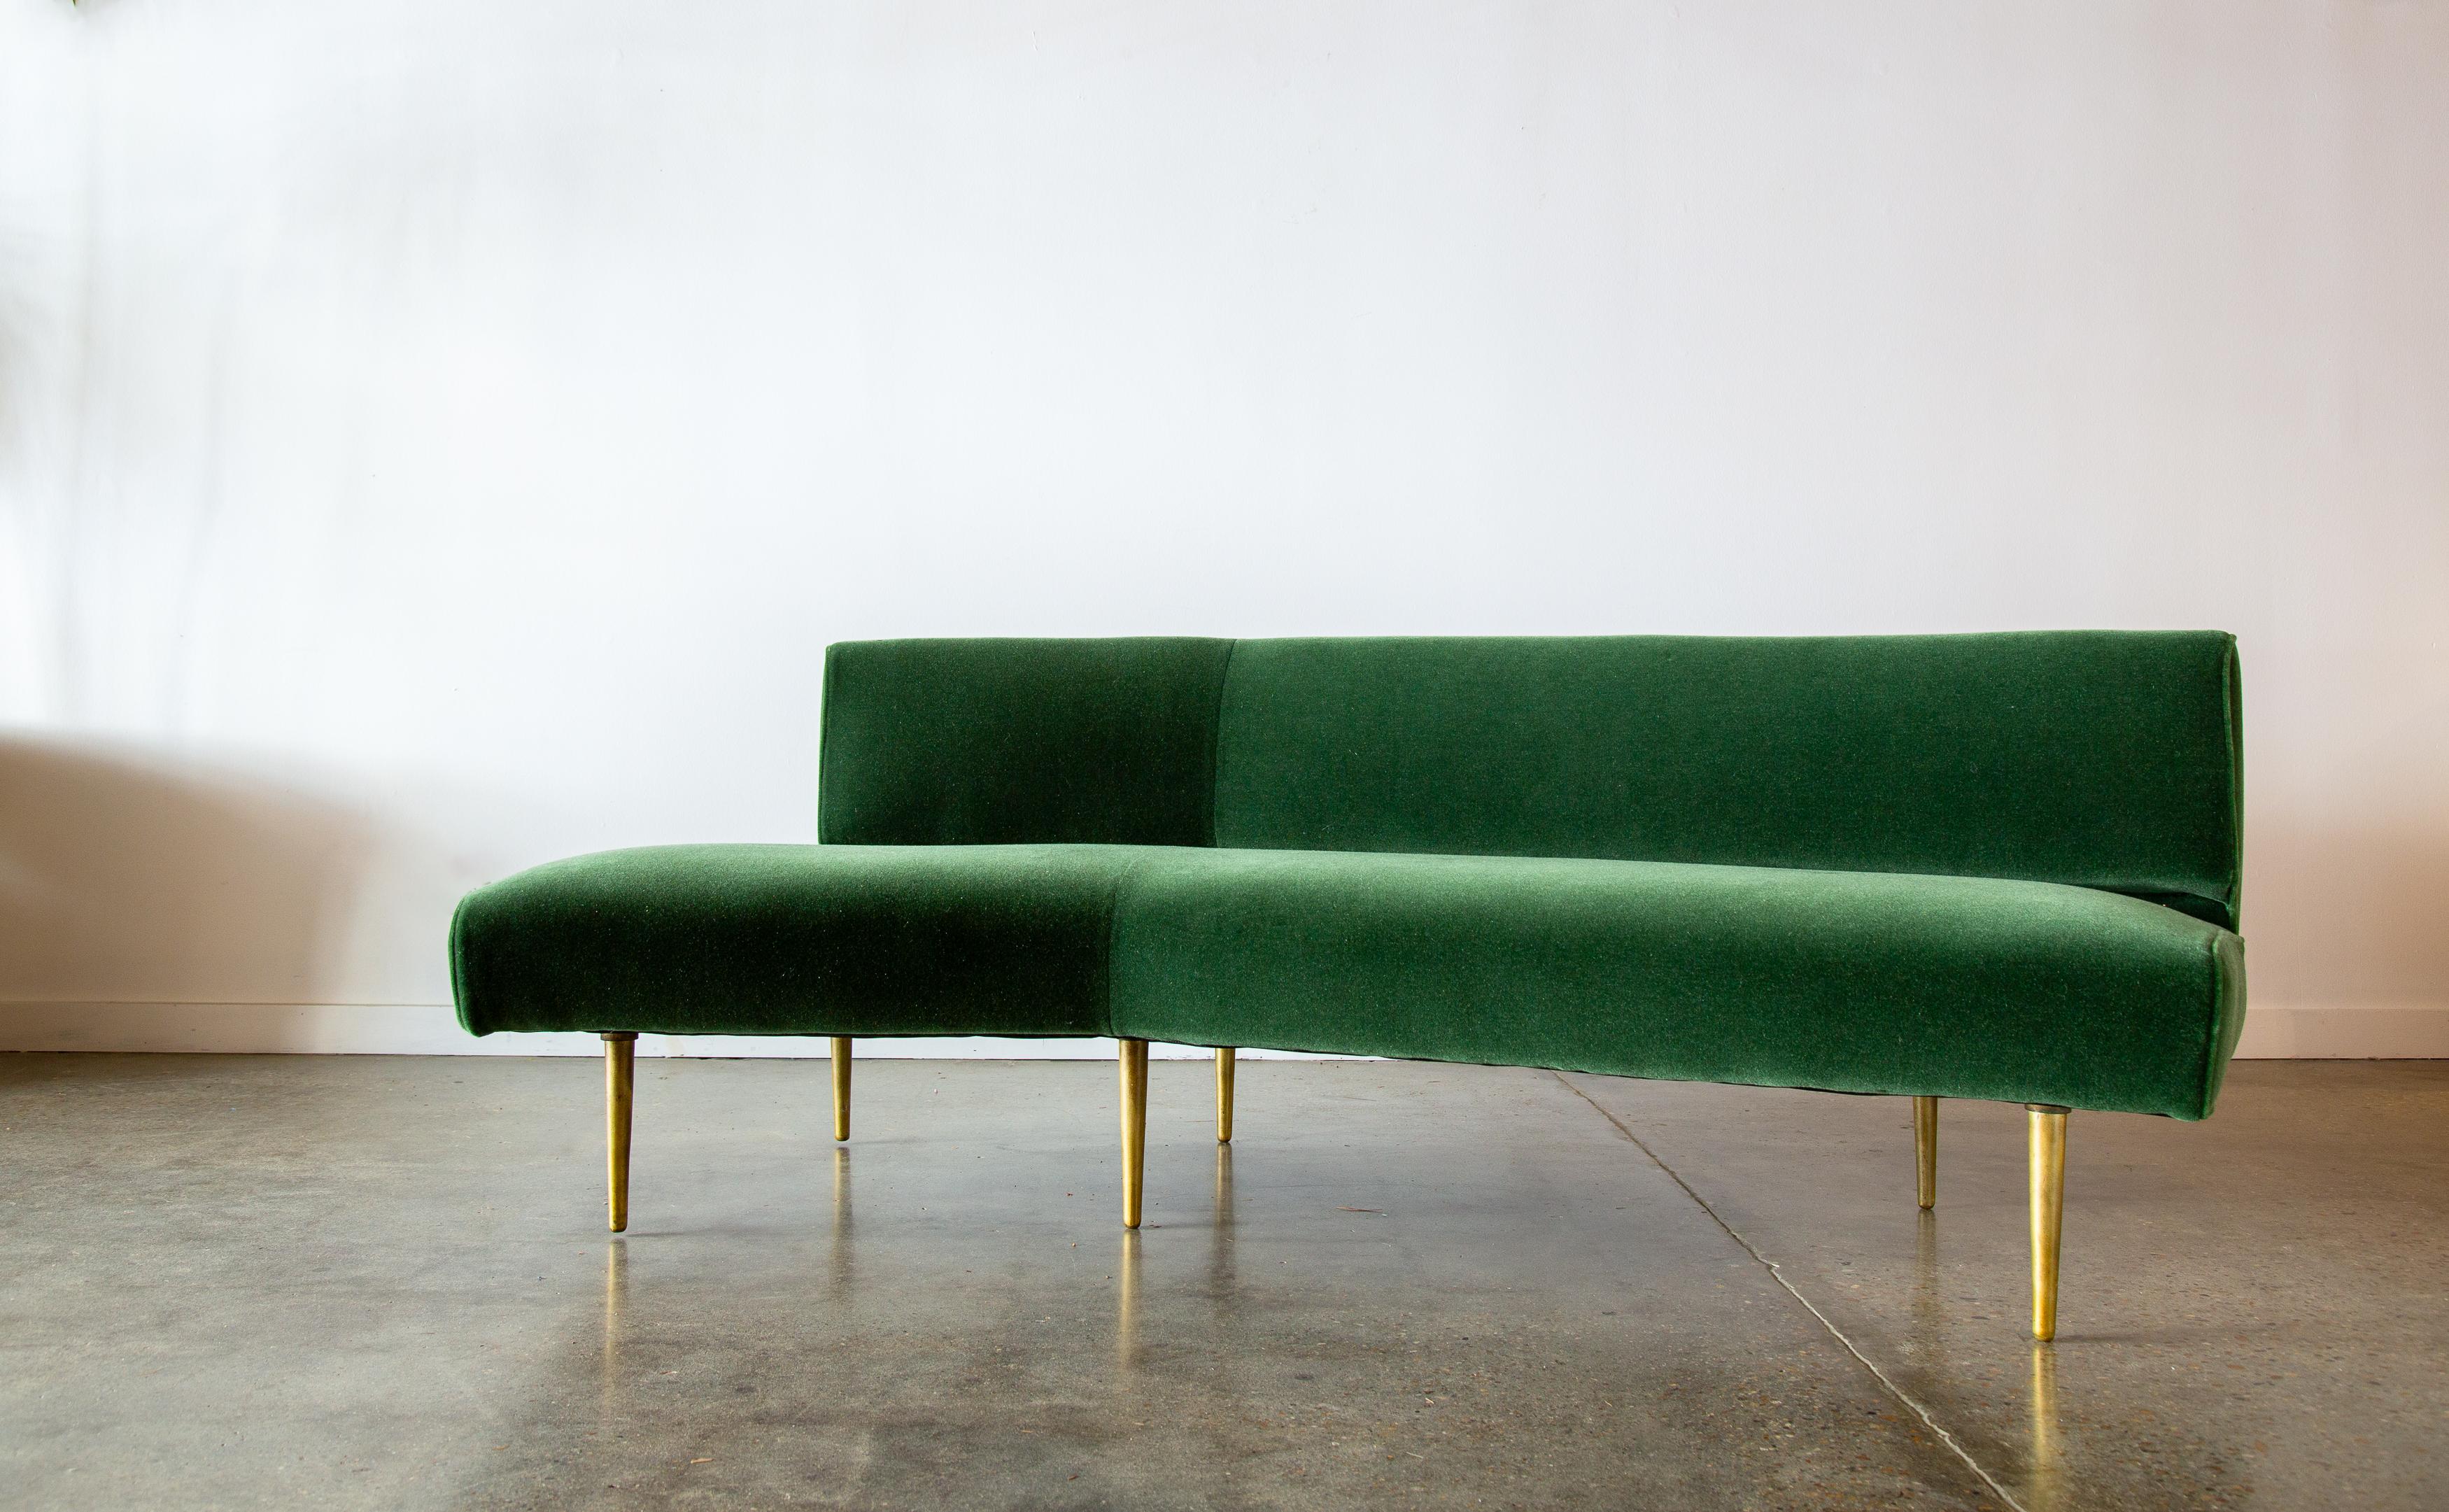 A rare offering from Edward Wormley for Dunbar Furniture. This wing shaped sofa, model 4756, was reupholstered in a moss colored mohair and sits on 10